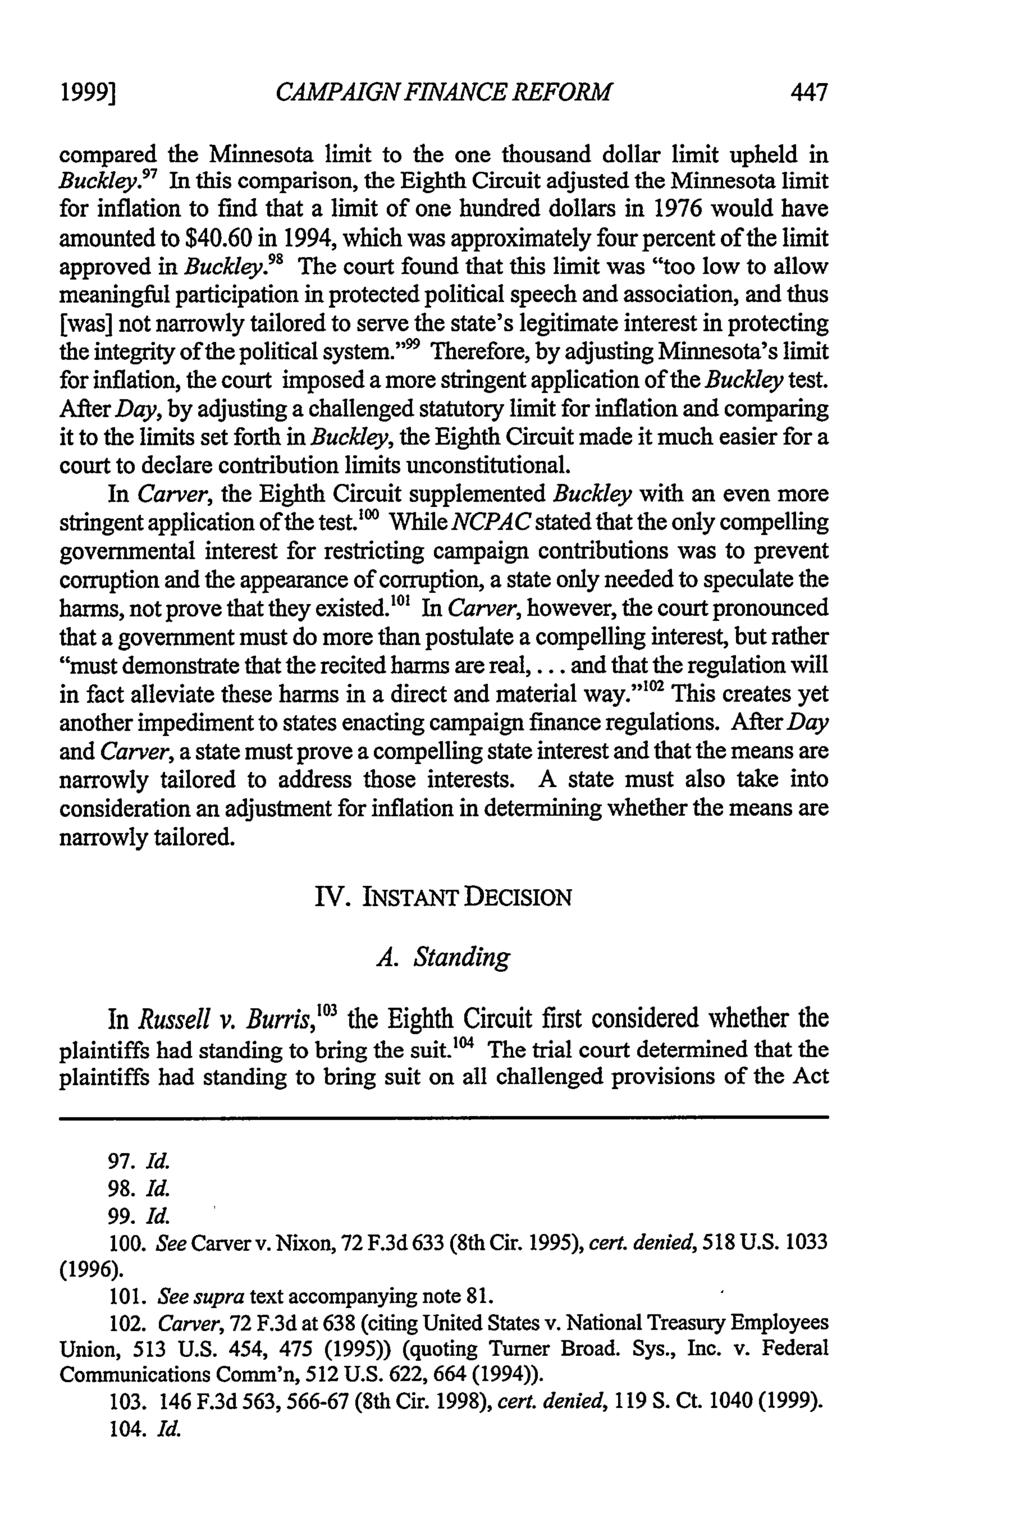 1999] Criscimagna: Criscimagna: Narrow Application of Buckley v. Valeo: CAMPAIGN FINANCE REFORM compared the Minnesota limit to the one thousand dollar limit upheld in Buckley.